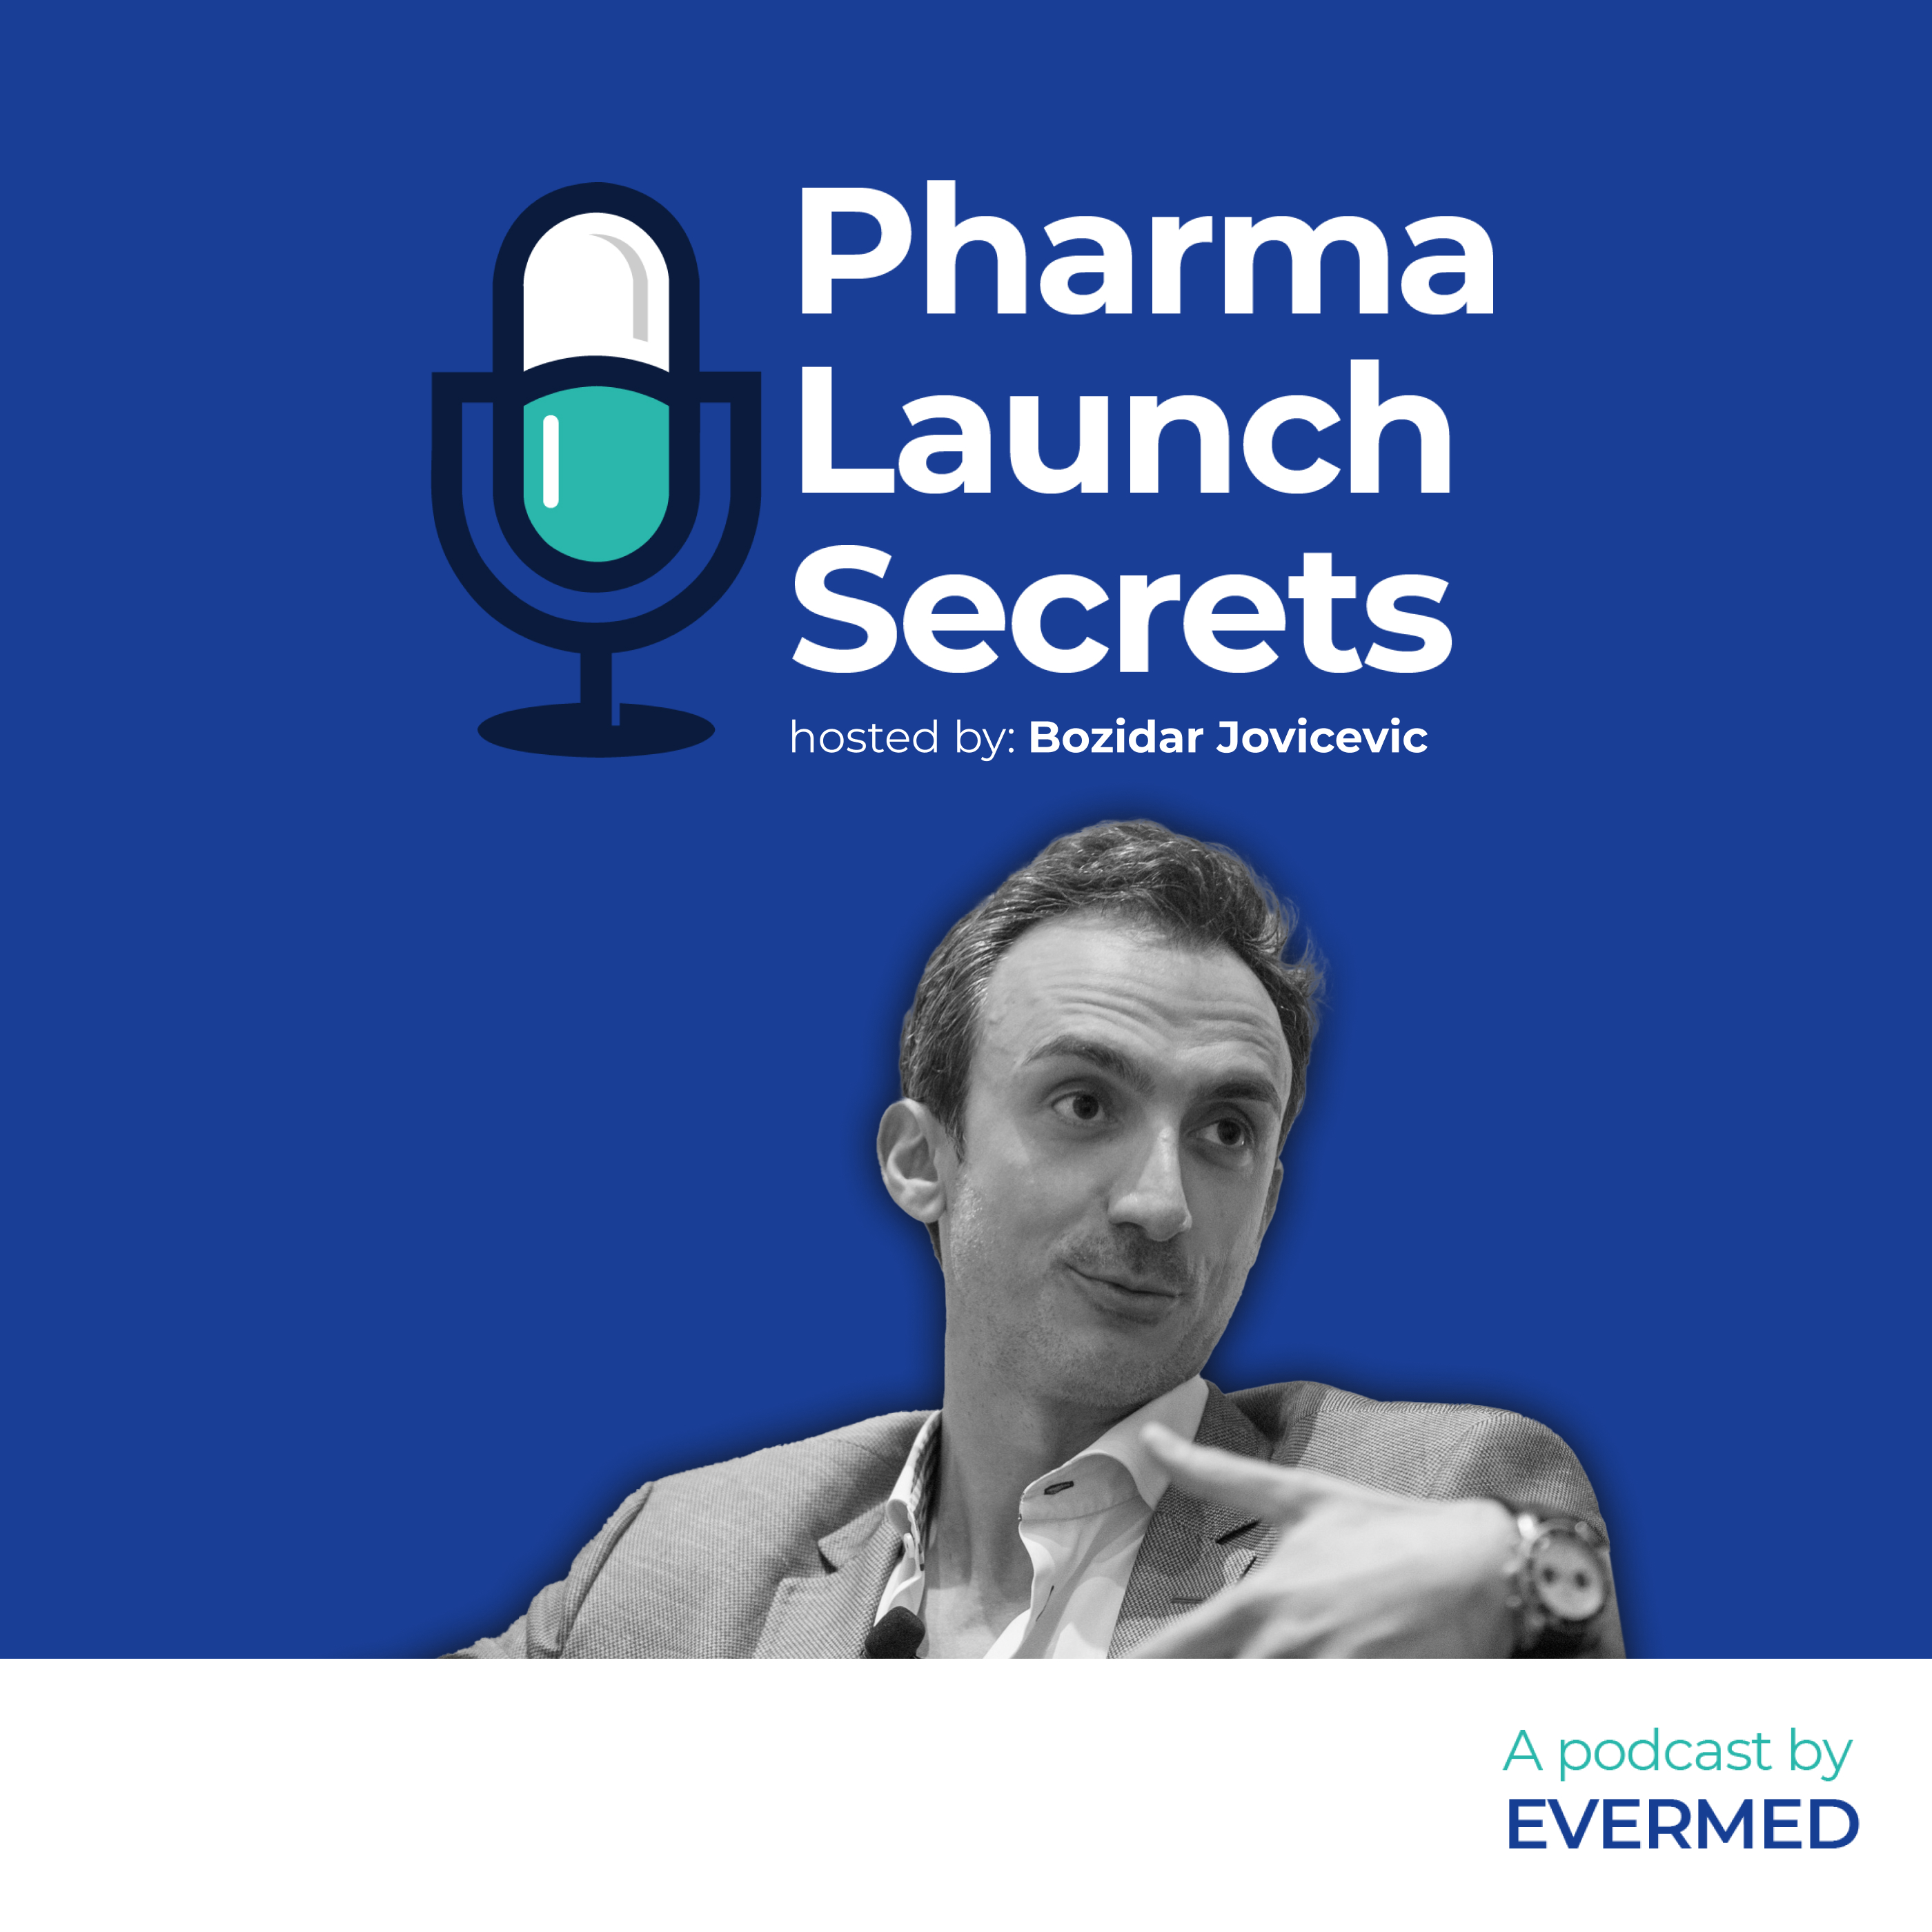 How to Use Personalized On-Demand Video to Engage HCPs. Bozidar Jovicevic, CEO of Evermed, Speaking at a Reuters Pharma Event